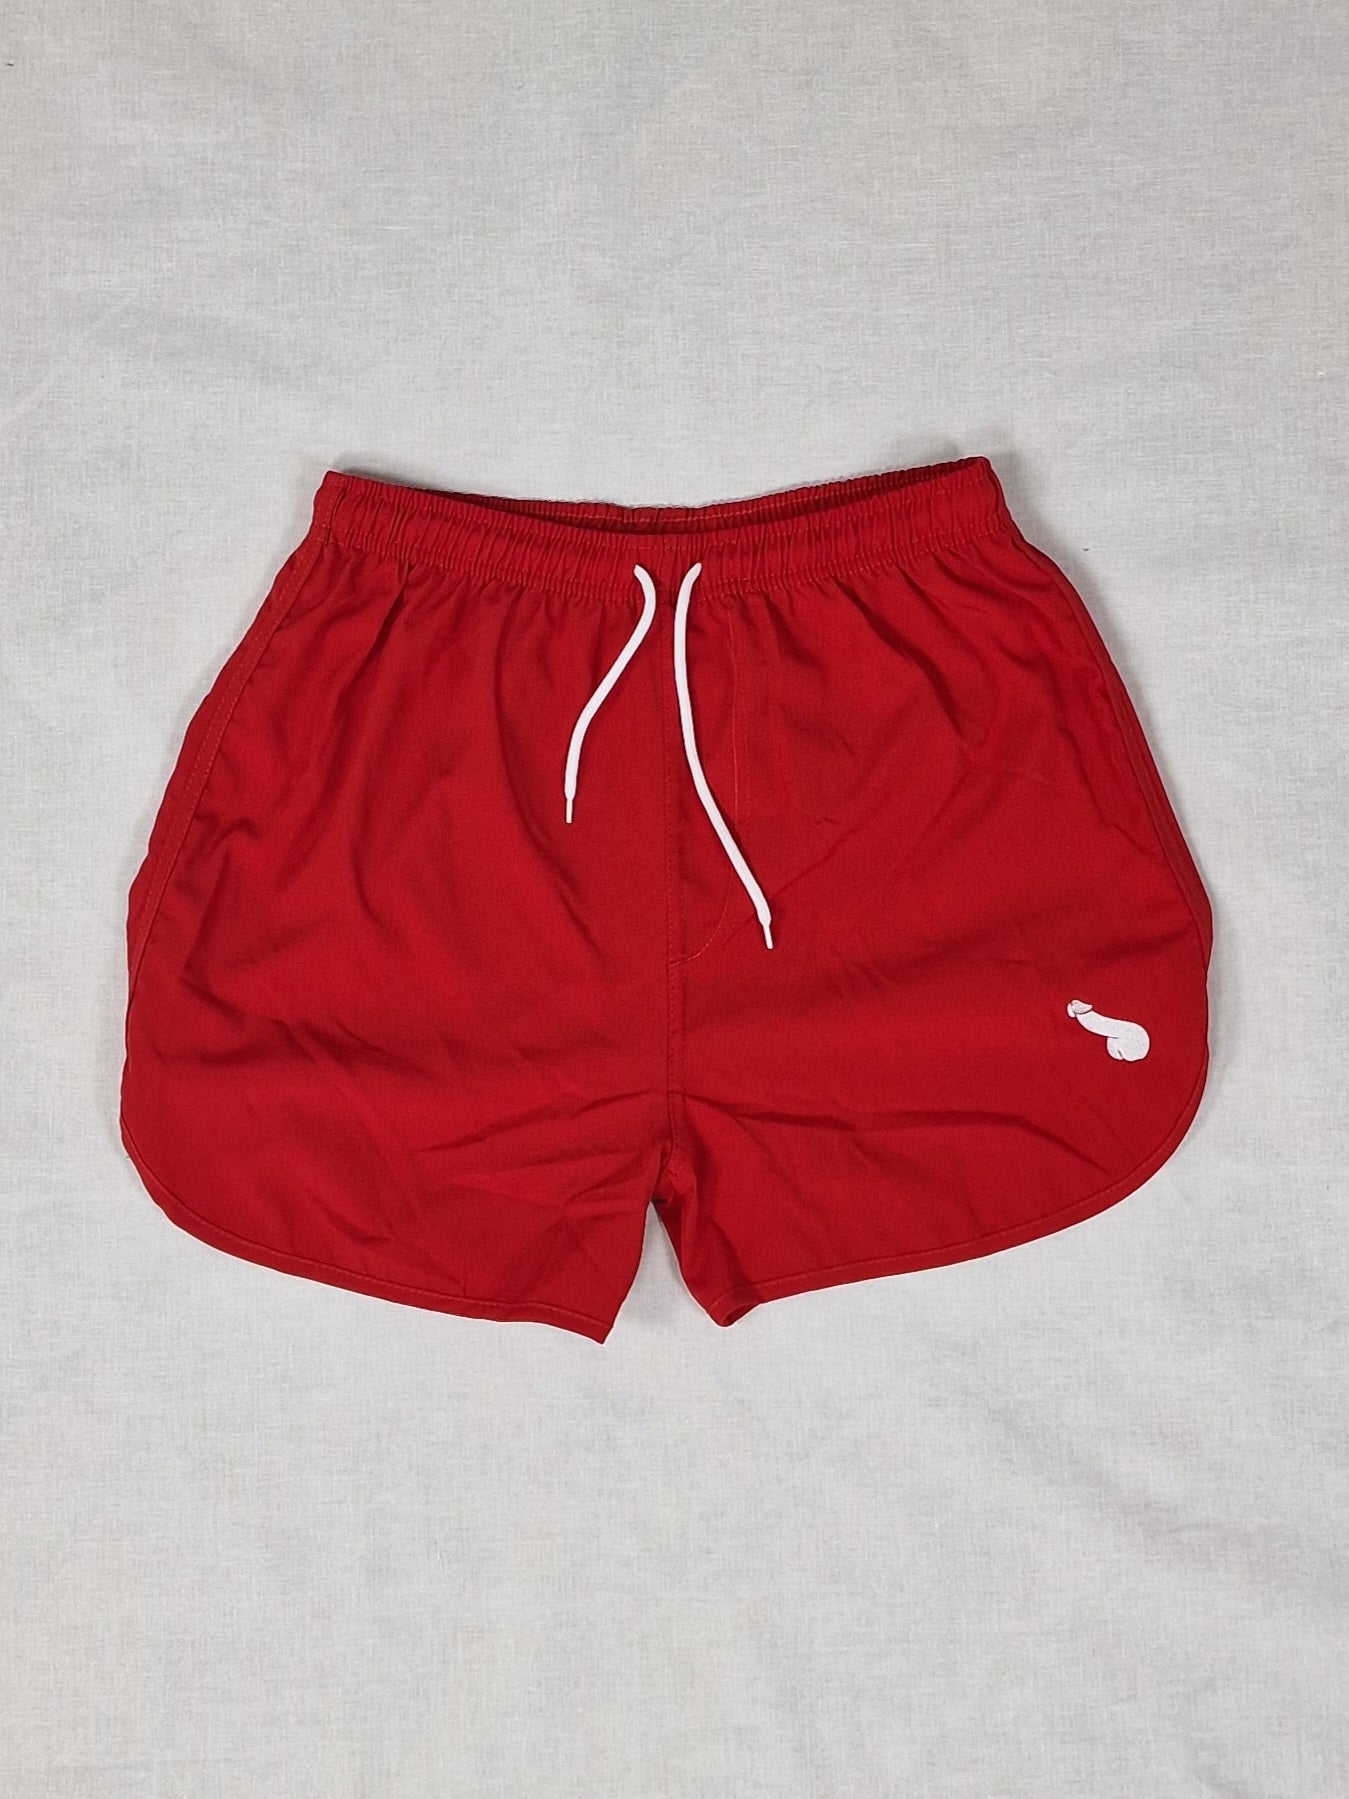 Men's shorts, light and stylish with a fantastic fit